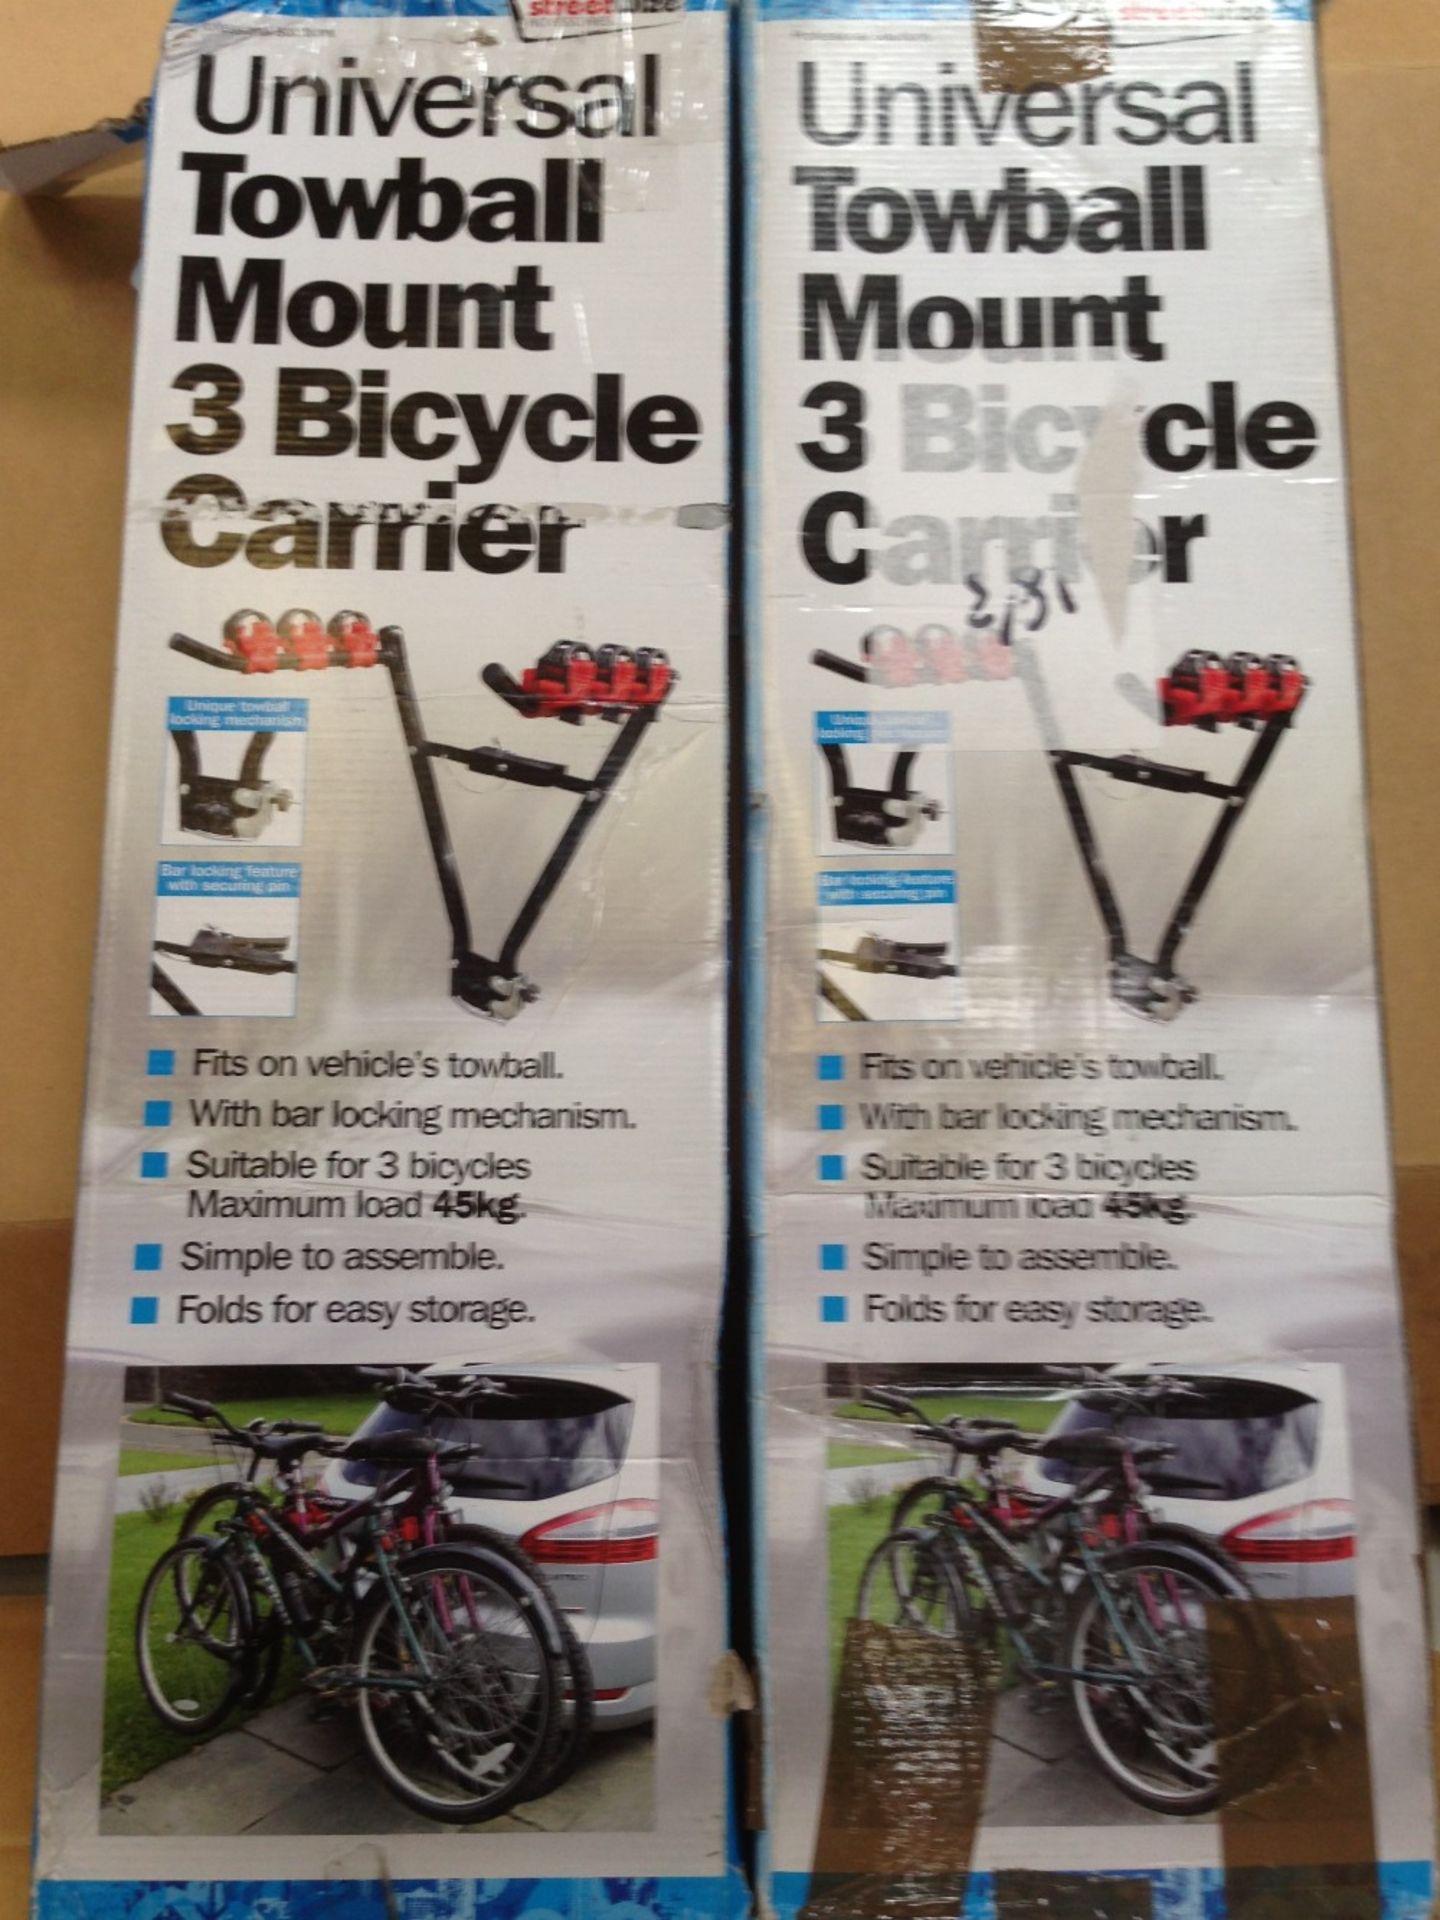 2pcs Universal Towball mount 3 cycle carrier rrp £24.100